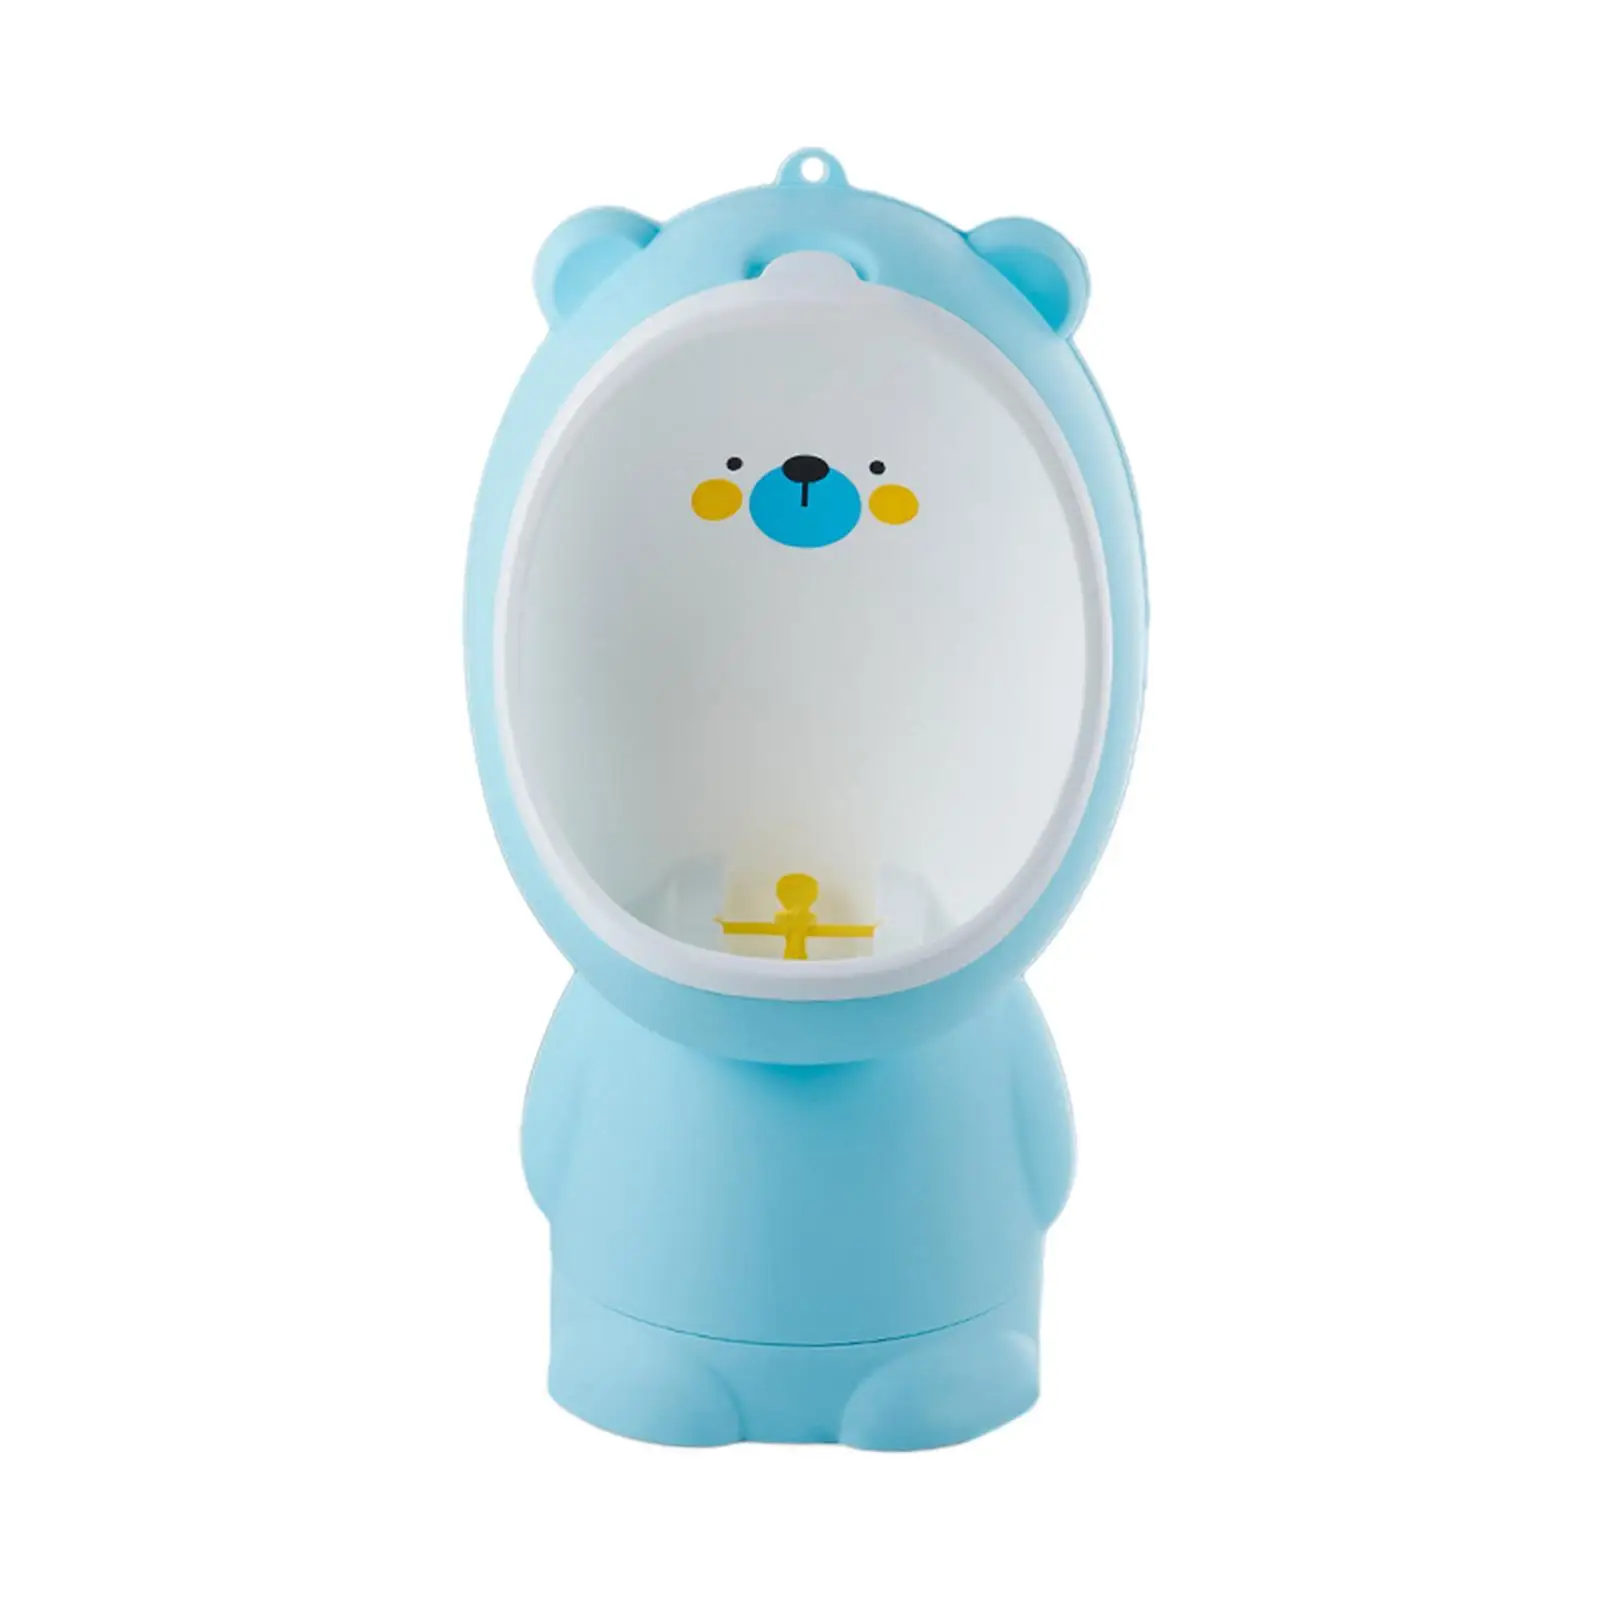 Urinals Toilet Training Standing Potty Cute Bear Potty Trainer Urinal Urinal Pee Trainer for Baby Kids Toddlers Boys Child